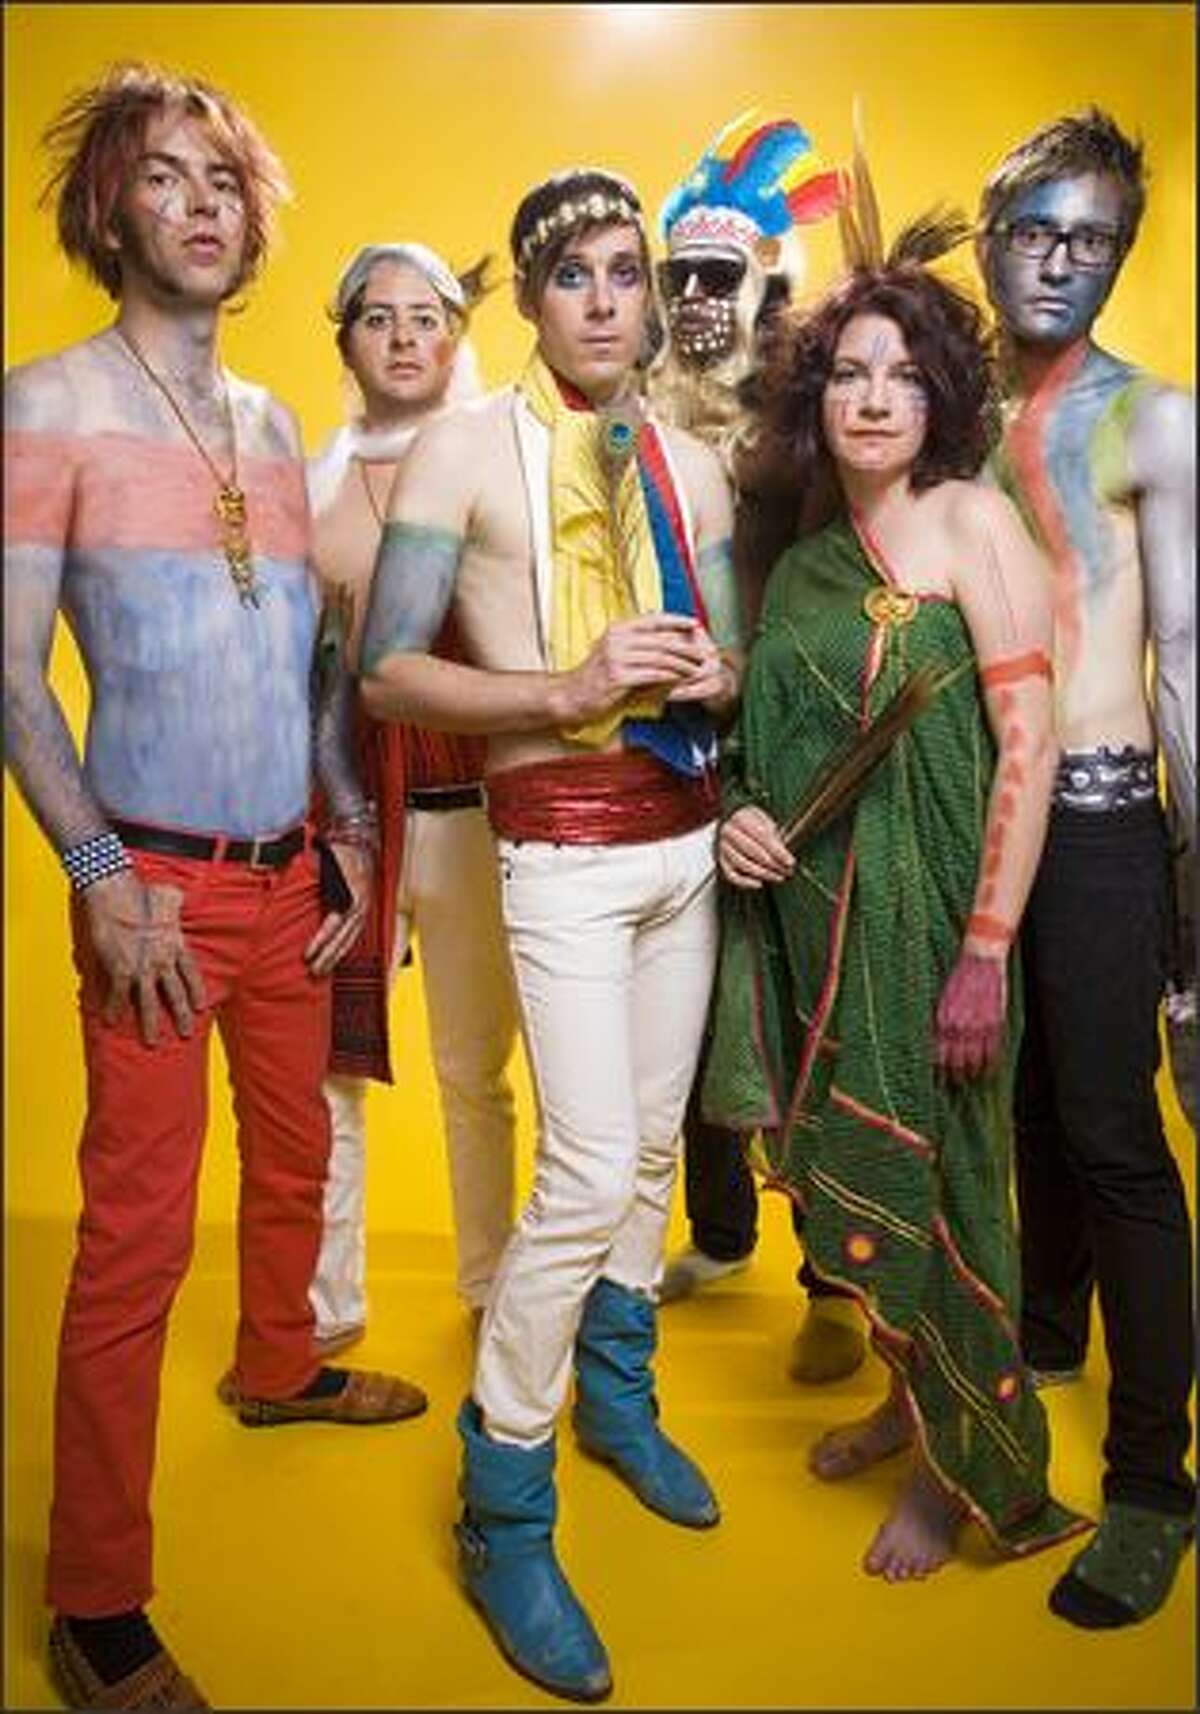 Of Montreal’s mix of disco, glam, pop and punk reminds some of The Flaming Lips and others of David Bowie. We look at the group and think ... the Village People?